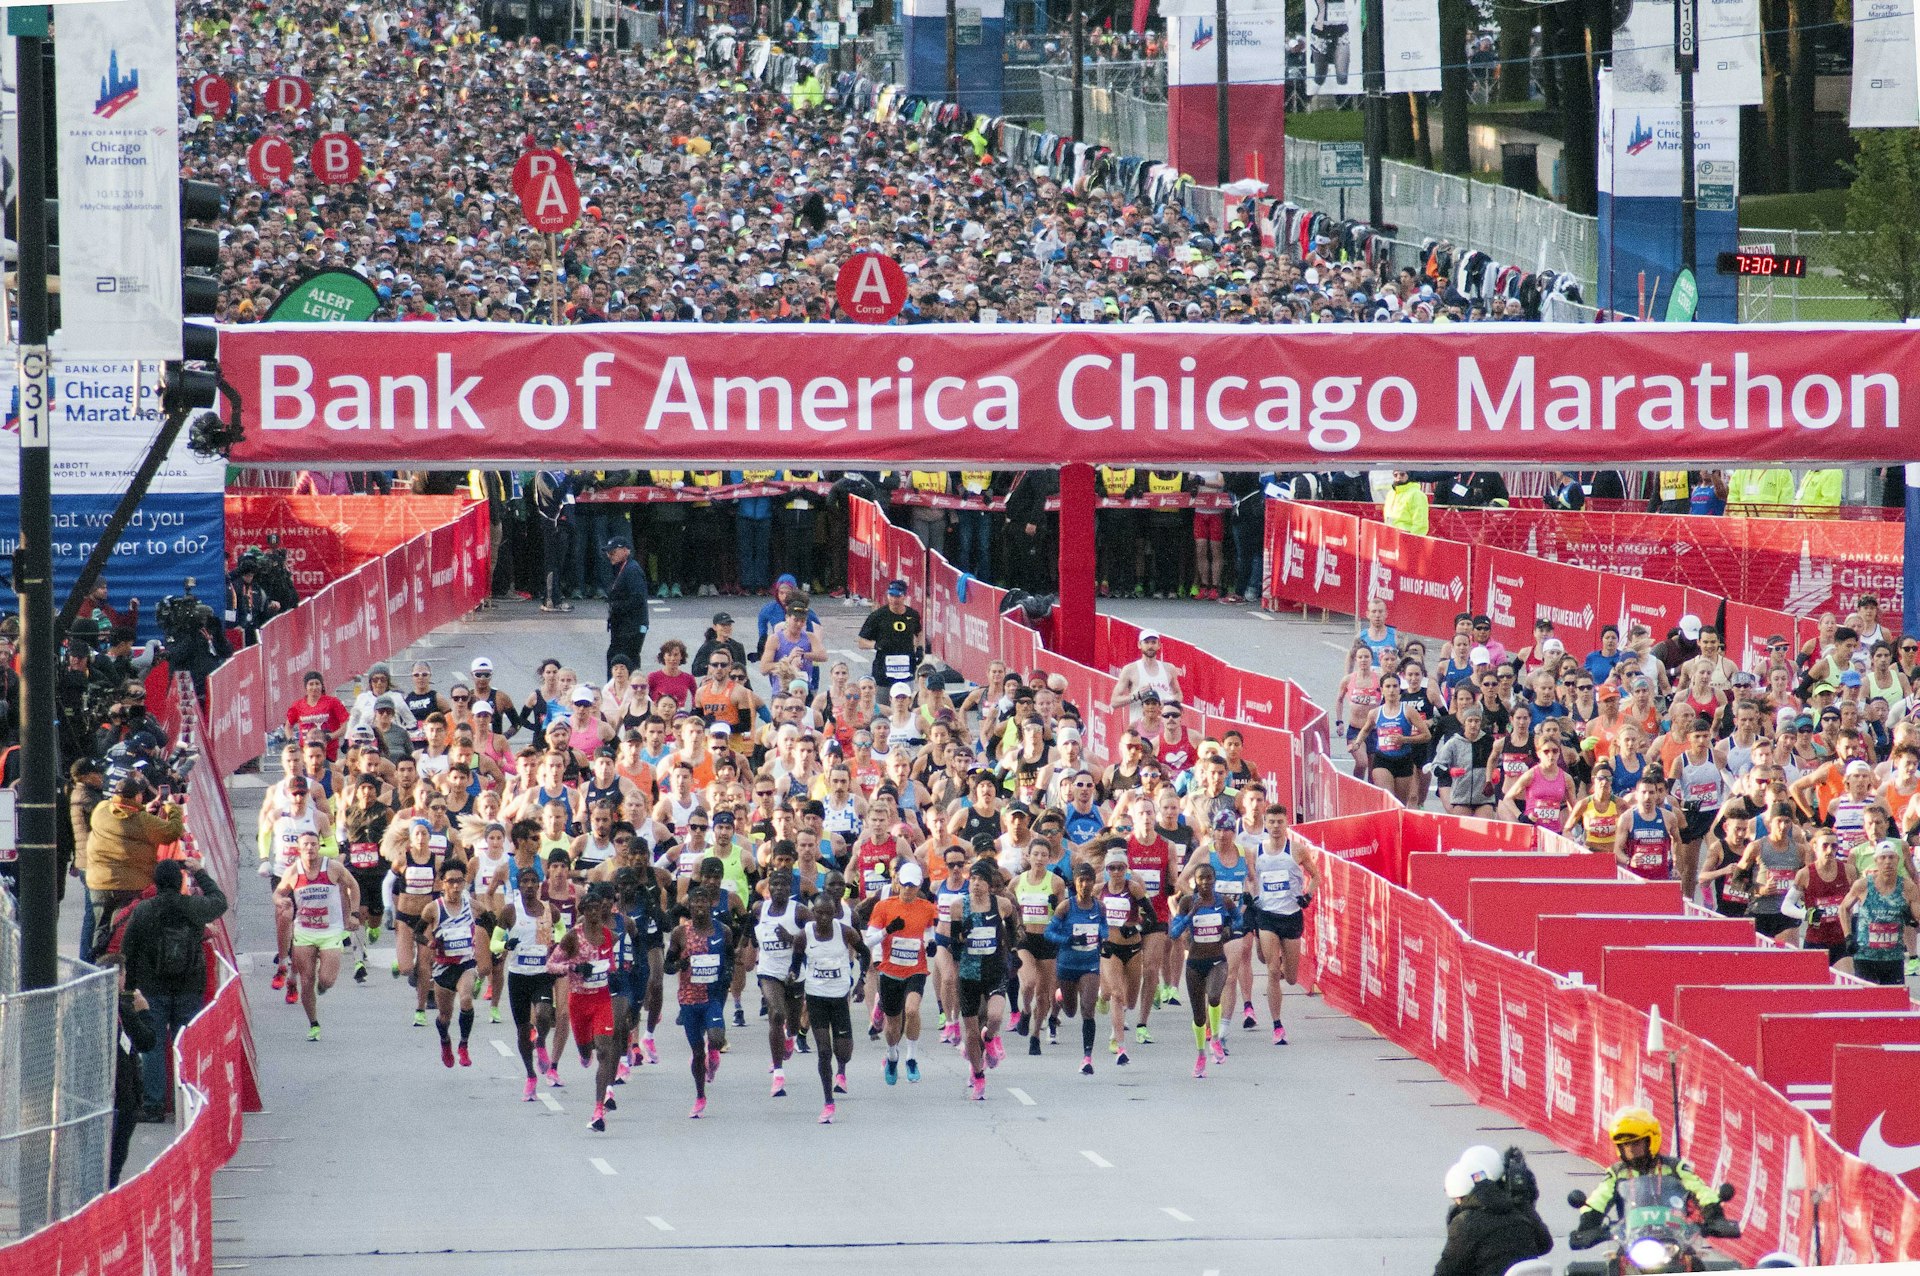 Thousands of runners begin the Chicago Marathon. There is a large red and white 'Bank of America Chicago Marathon' banner overhead.